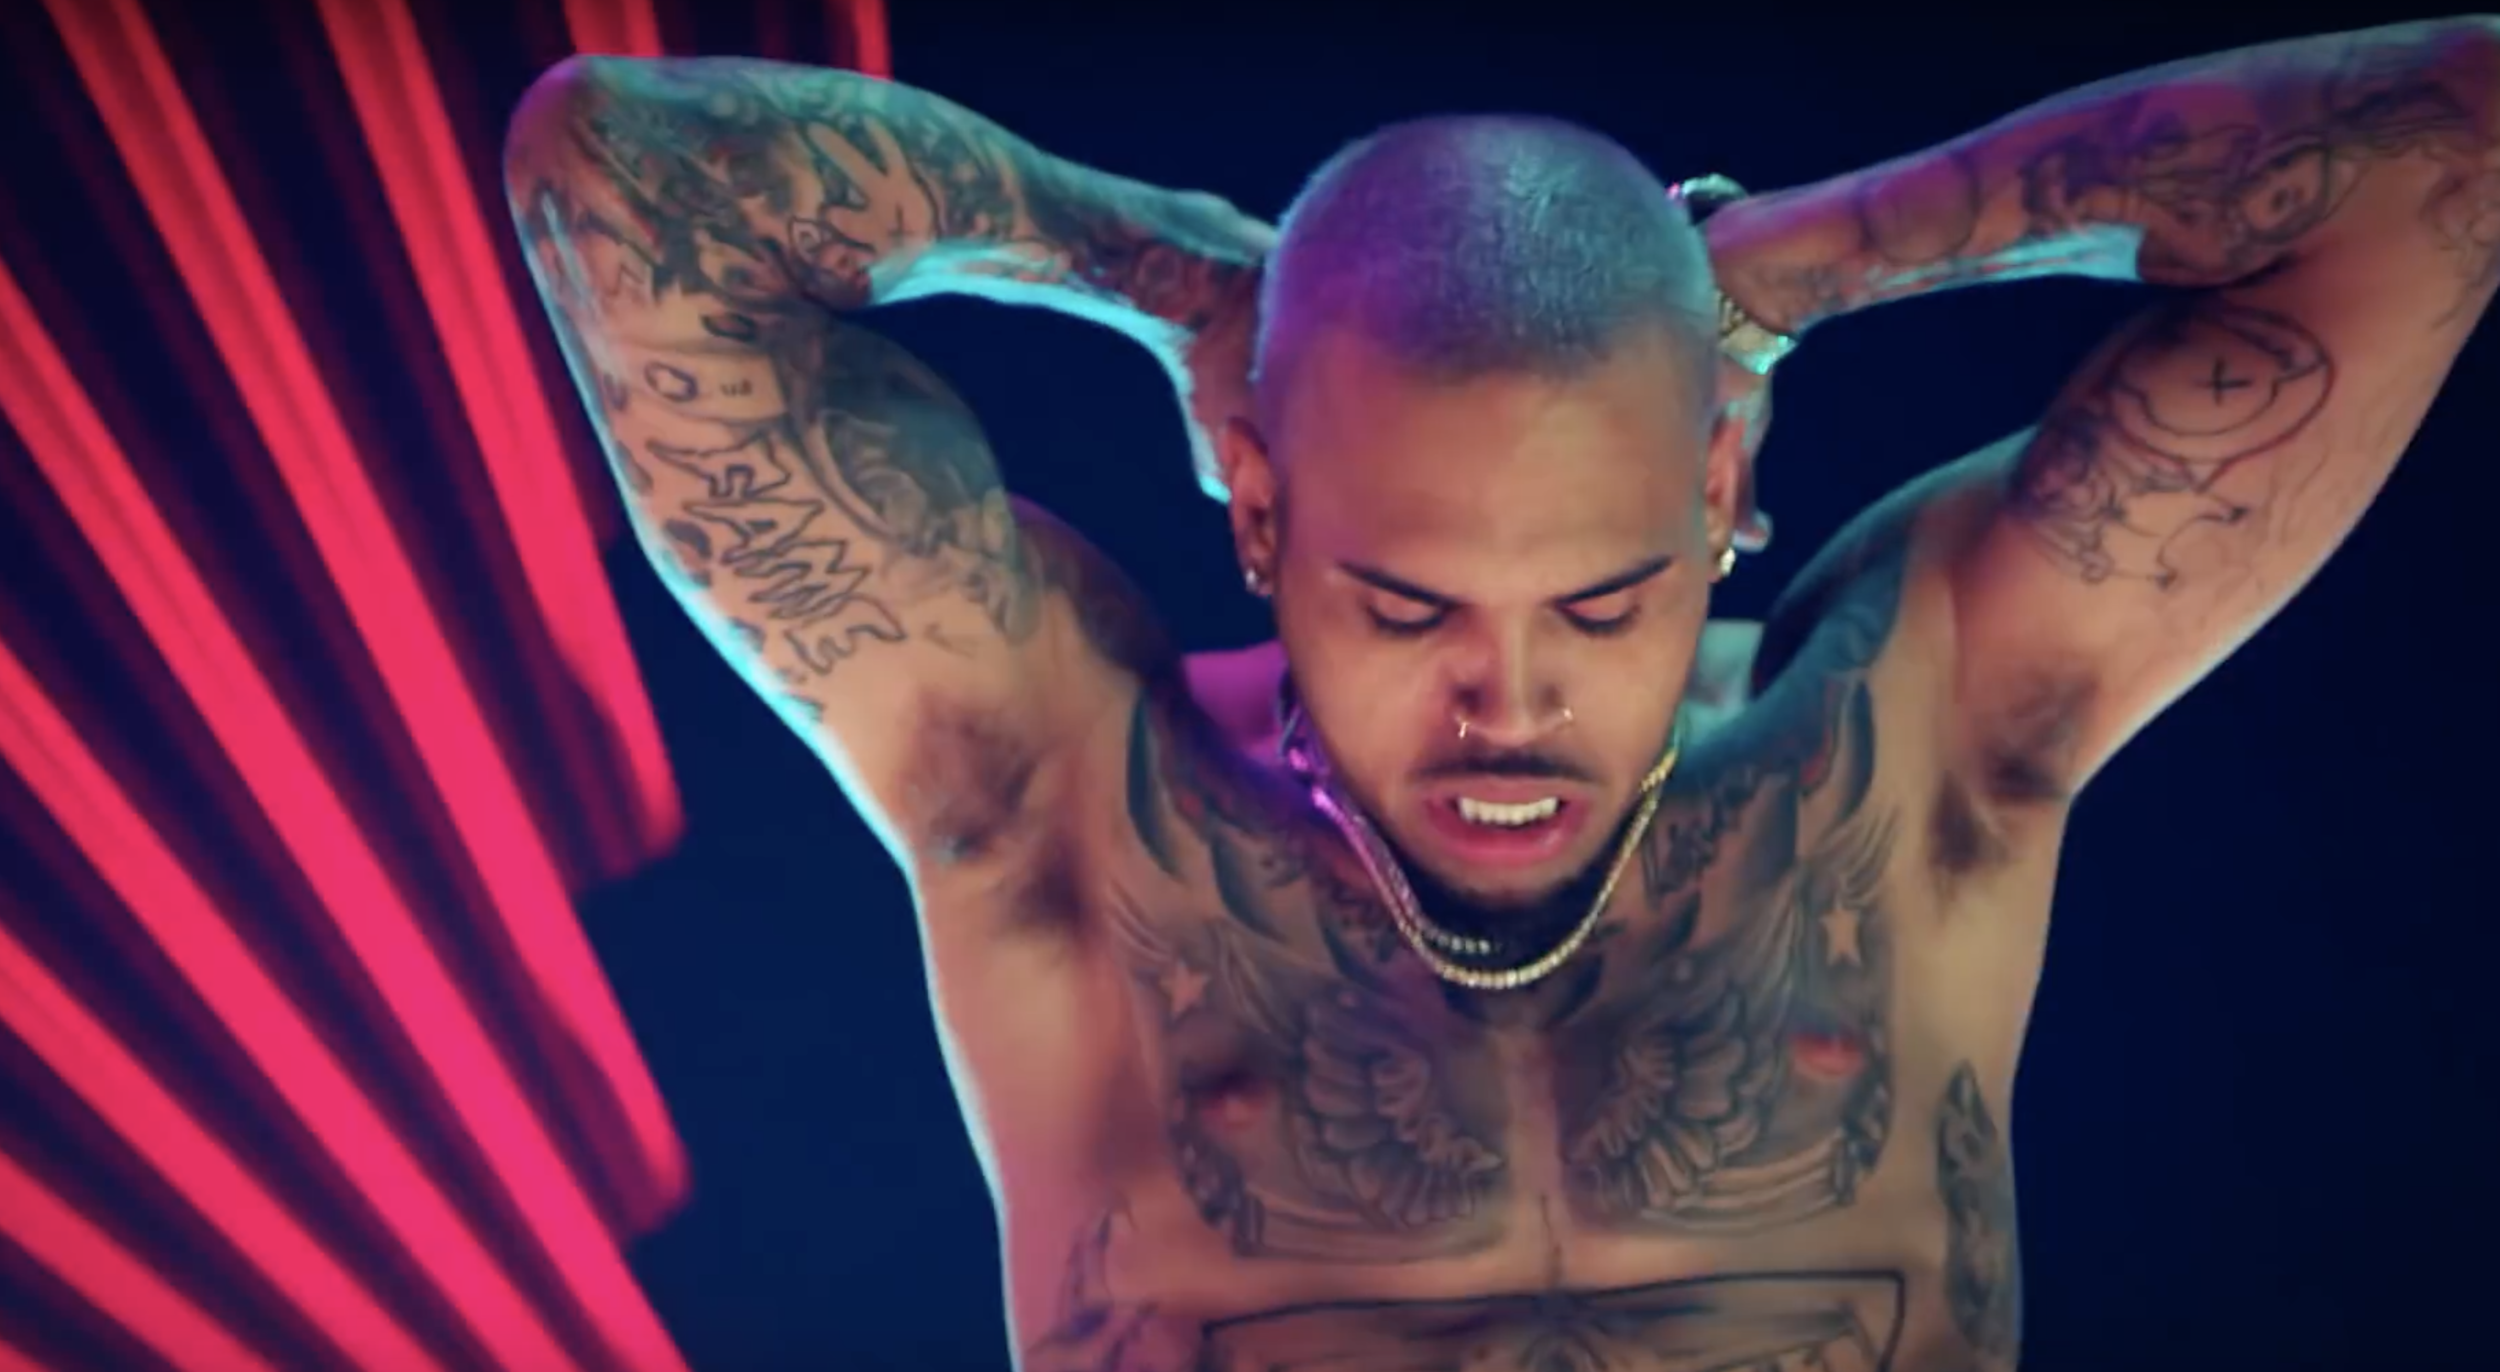 CHRIS BROWN "PRIVACY"